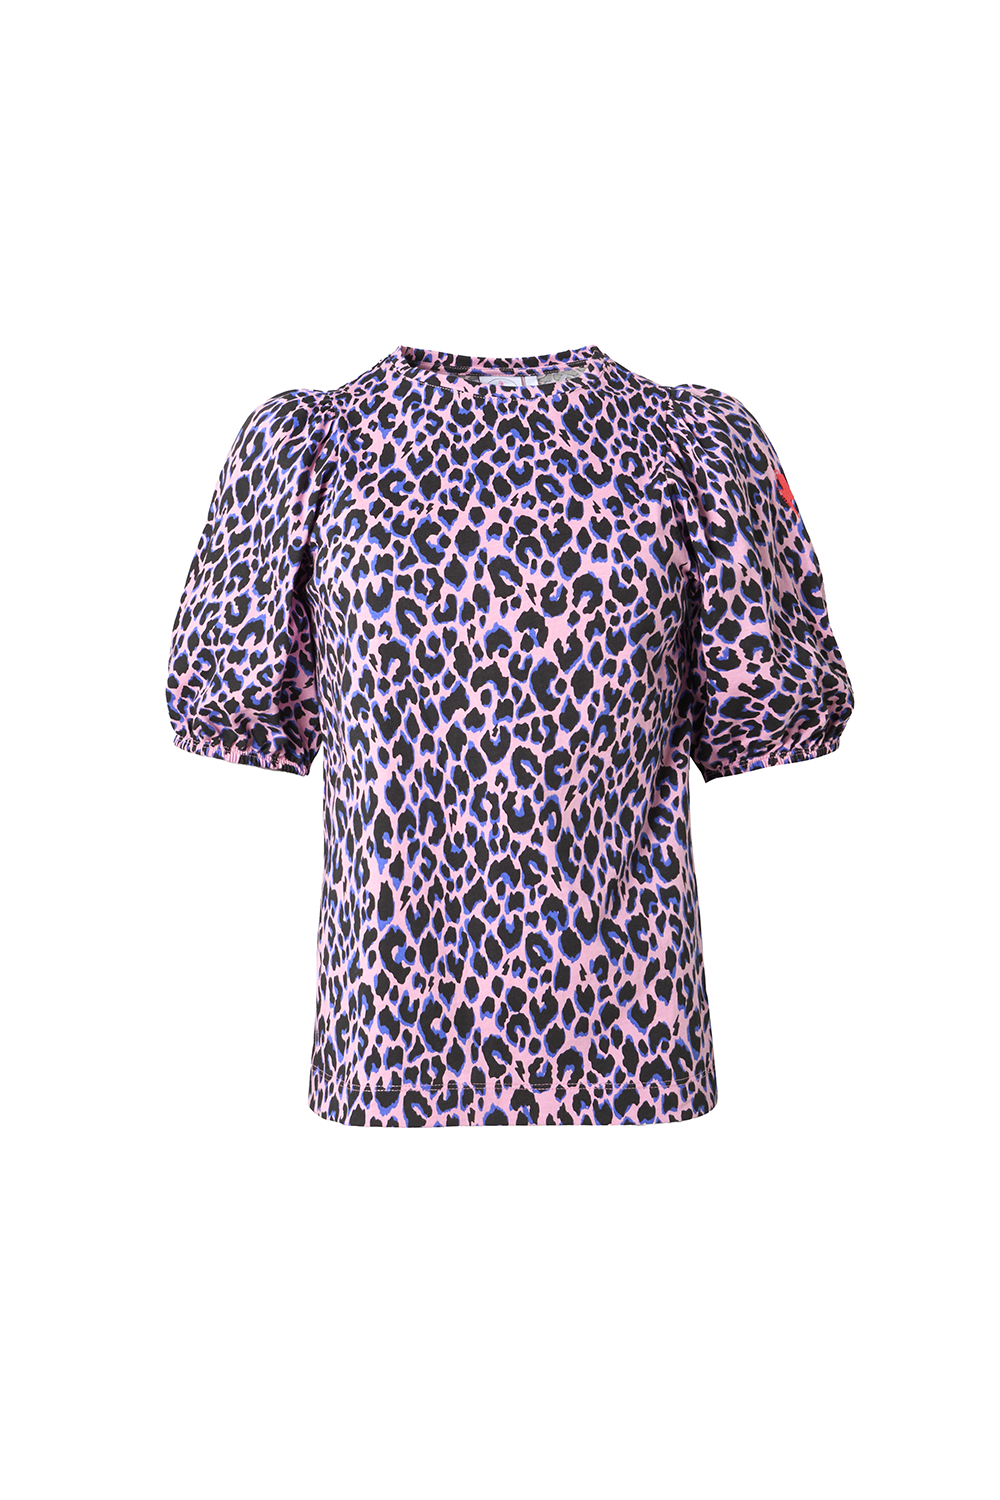 adults_pink_with_blue_and_black_shadow_leopard_puff_sleeve_t-shirt-0048-amended_1080x.png 1,000×1,500 pixels